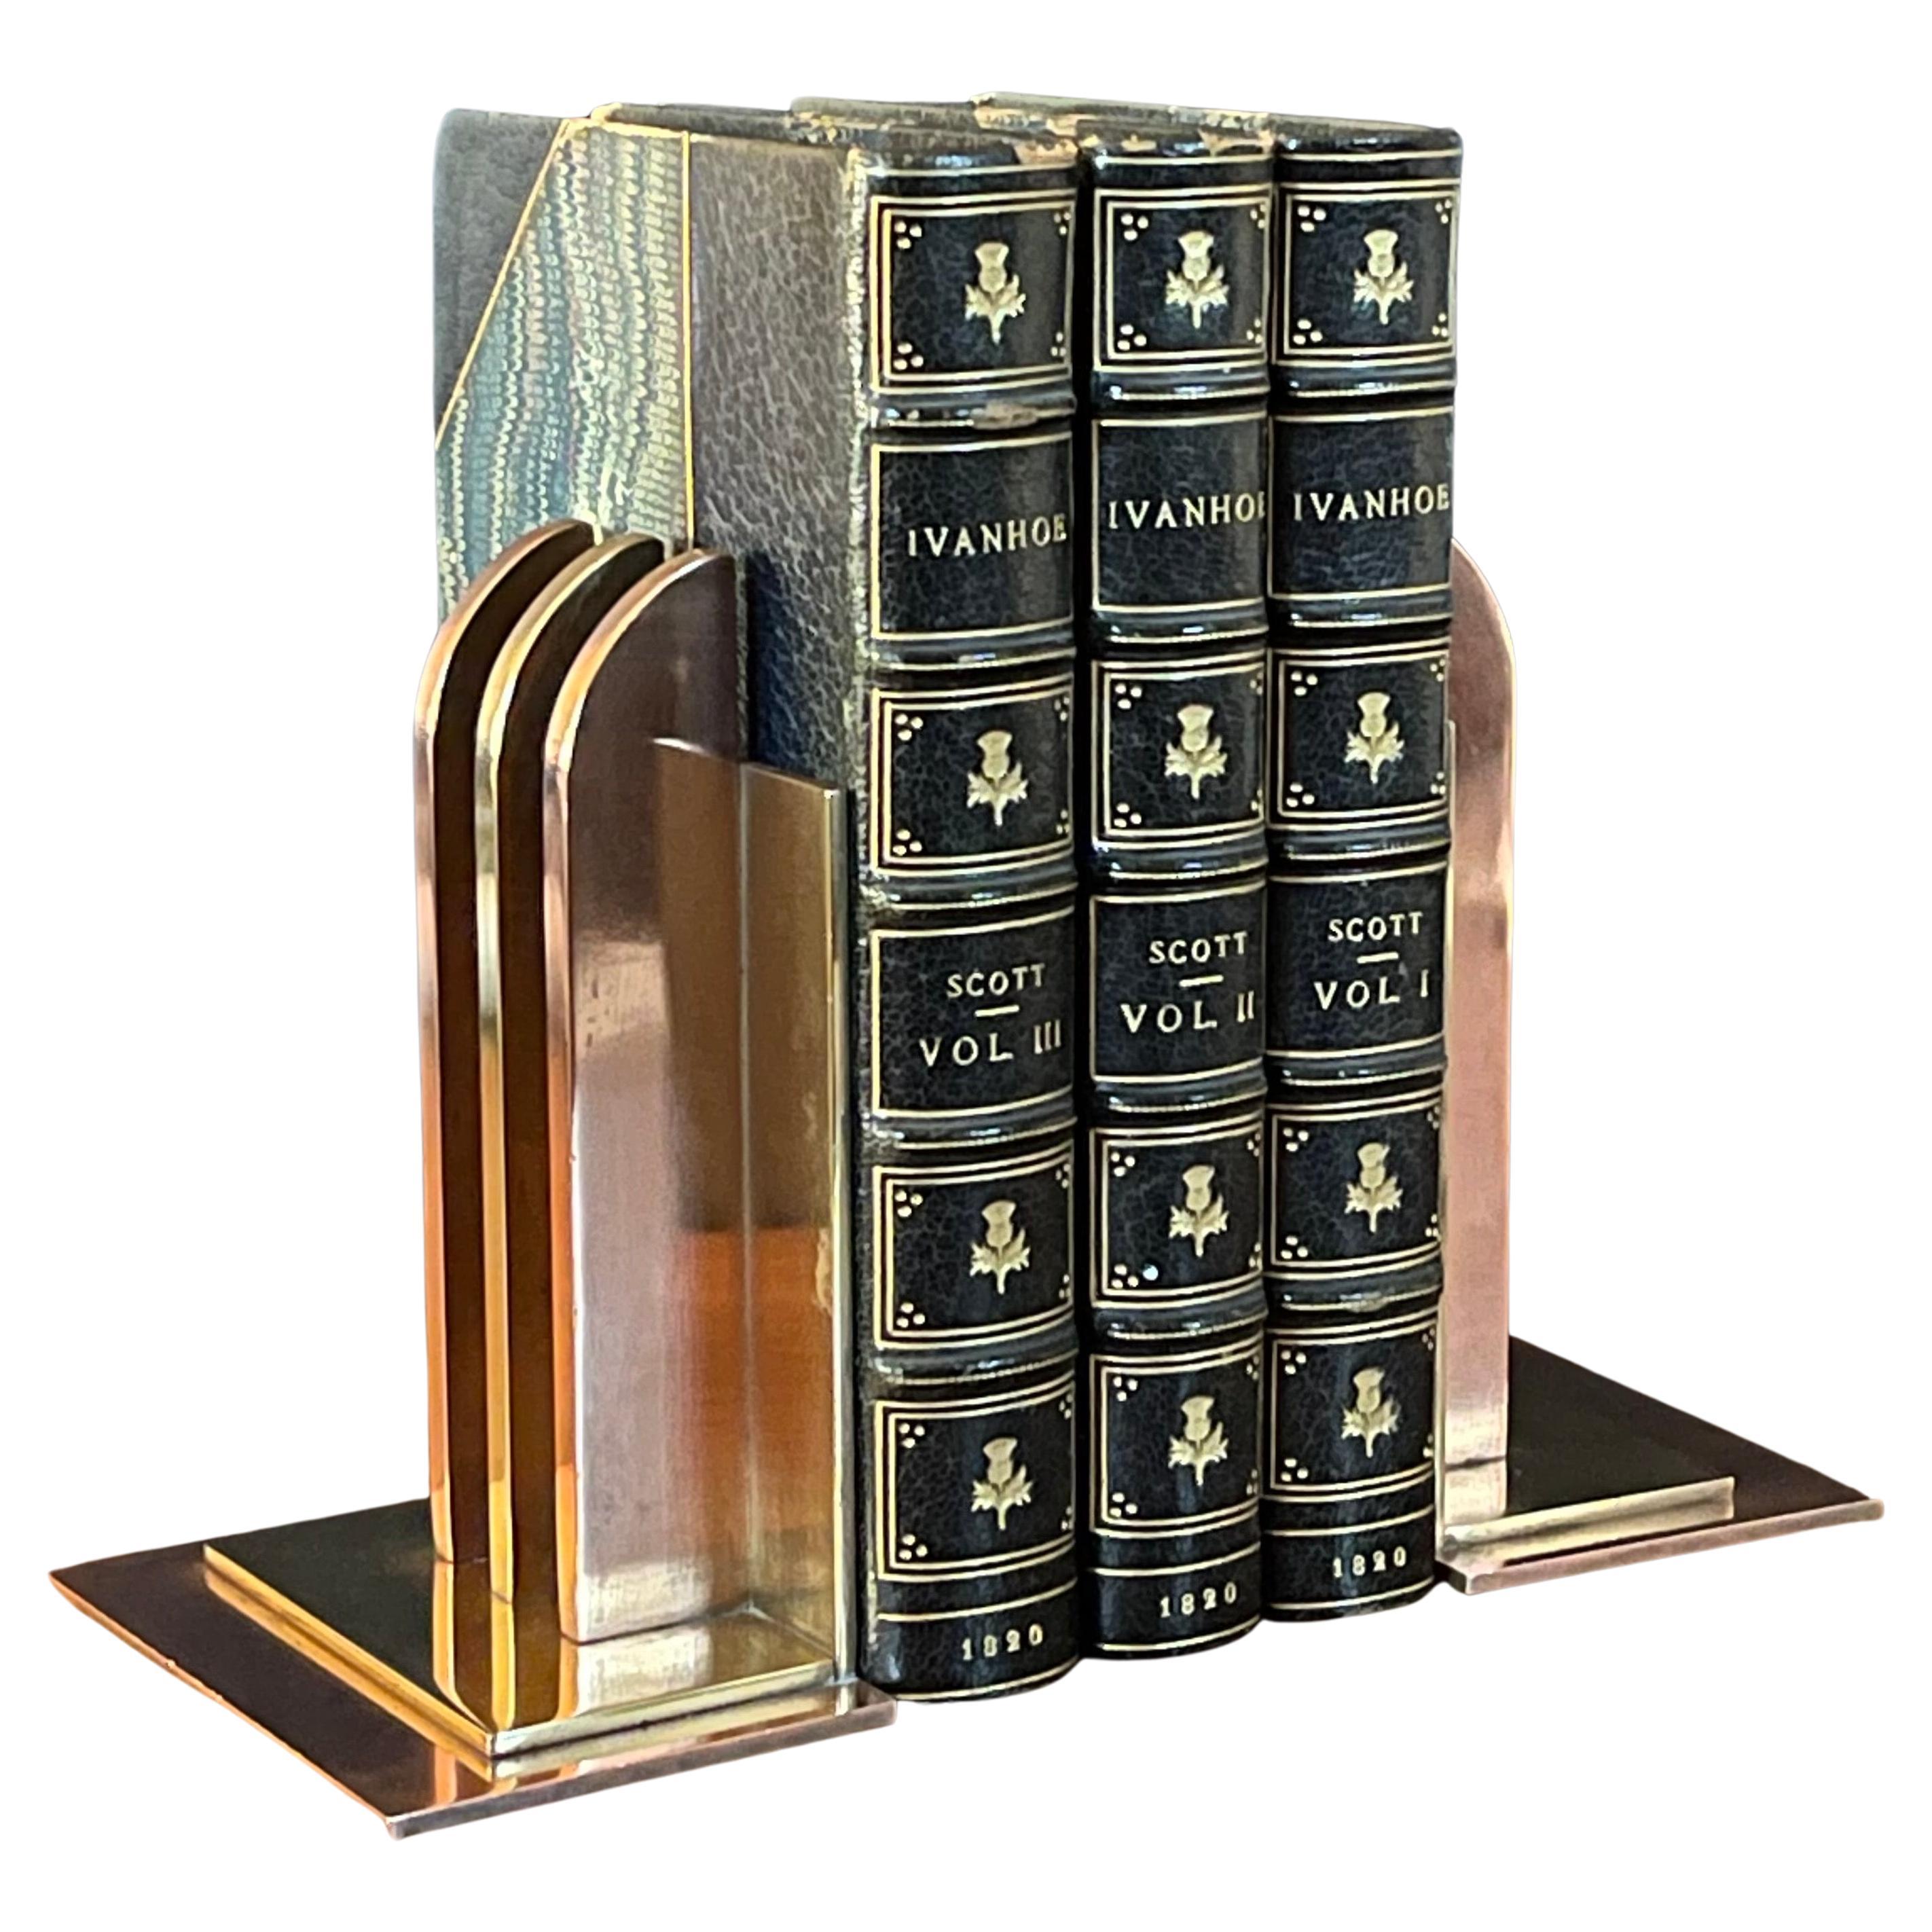 Gorgeous pair of machine age art deco bookends by Walter Von Nessen for Chase & Co., circa 1930s. These are solid brass and copper bookends with three perpendicular rounded beams along a square back. The bookends are in very good vintage condition